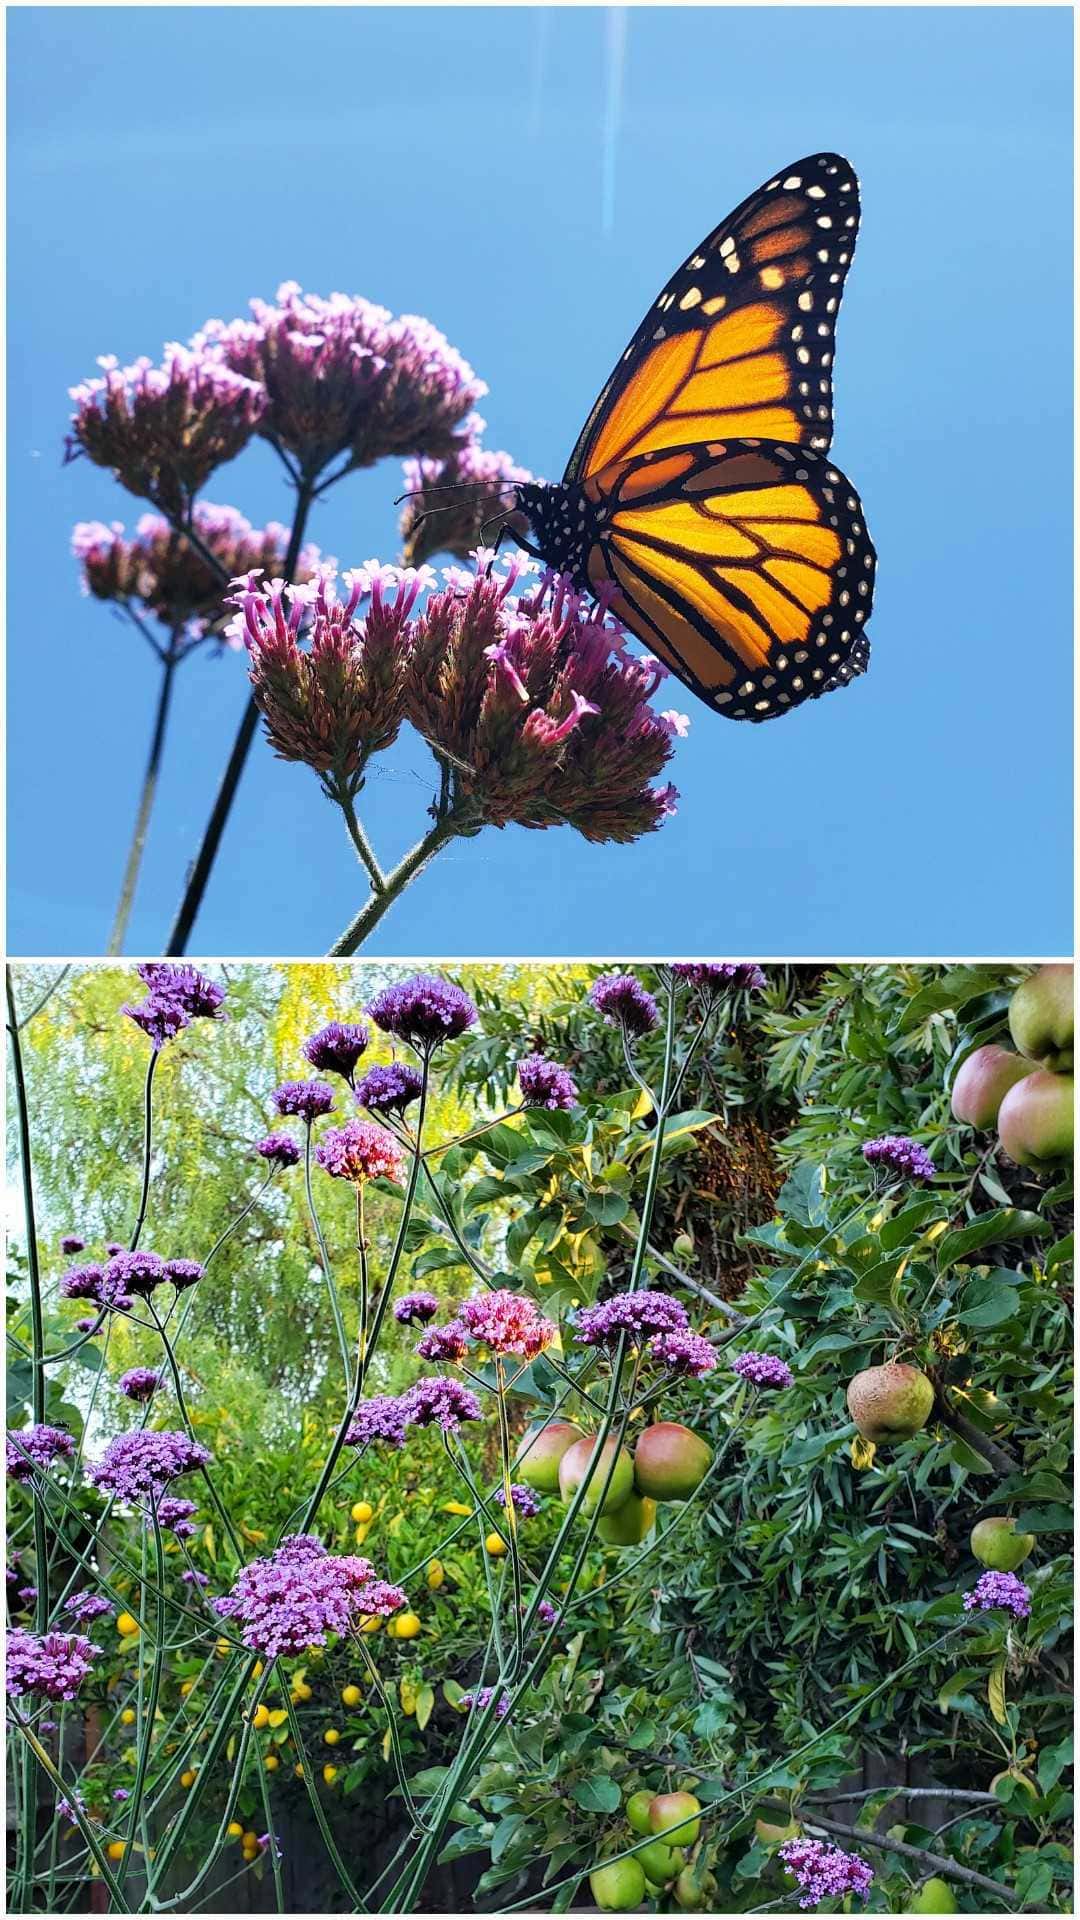 A monarch rests on a purple verbena plant, which has clusters of tiny flowers in balls at the end of otherwise bare stems. The blue sky and sun is in the background, illuminating the monarchs orange wings with black borders and white dots